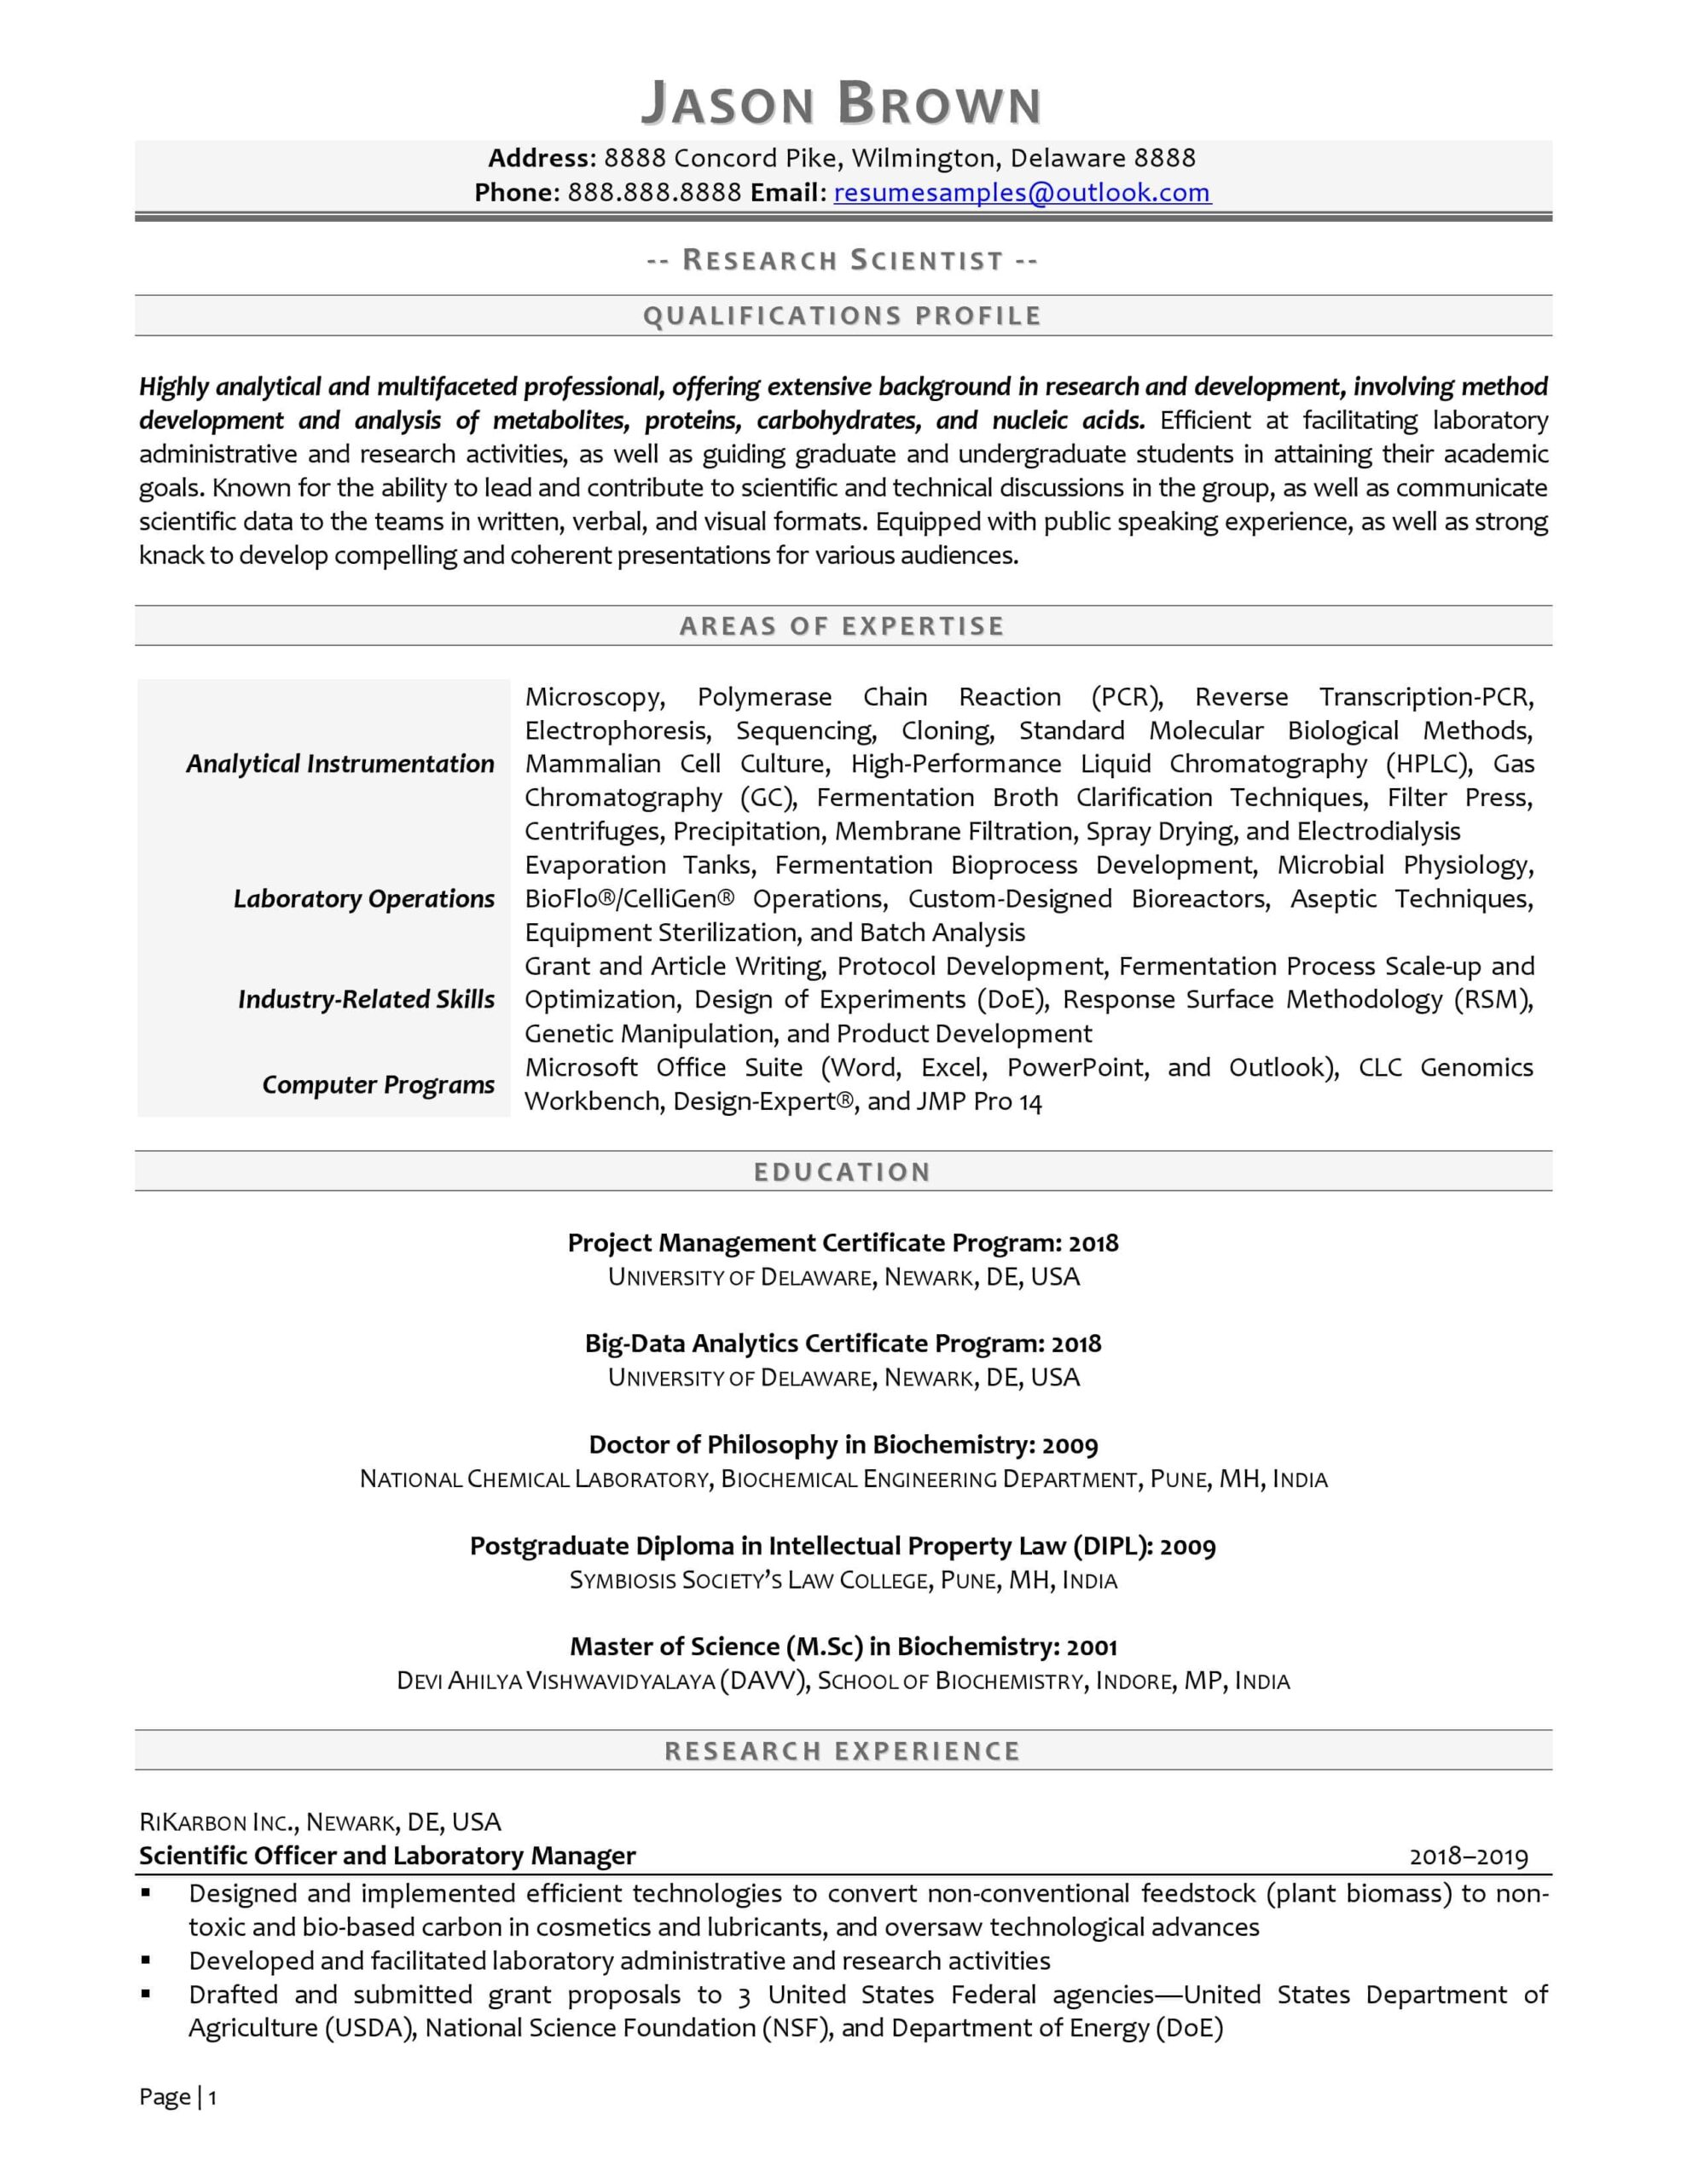 how to write research experience on resume